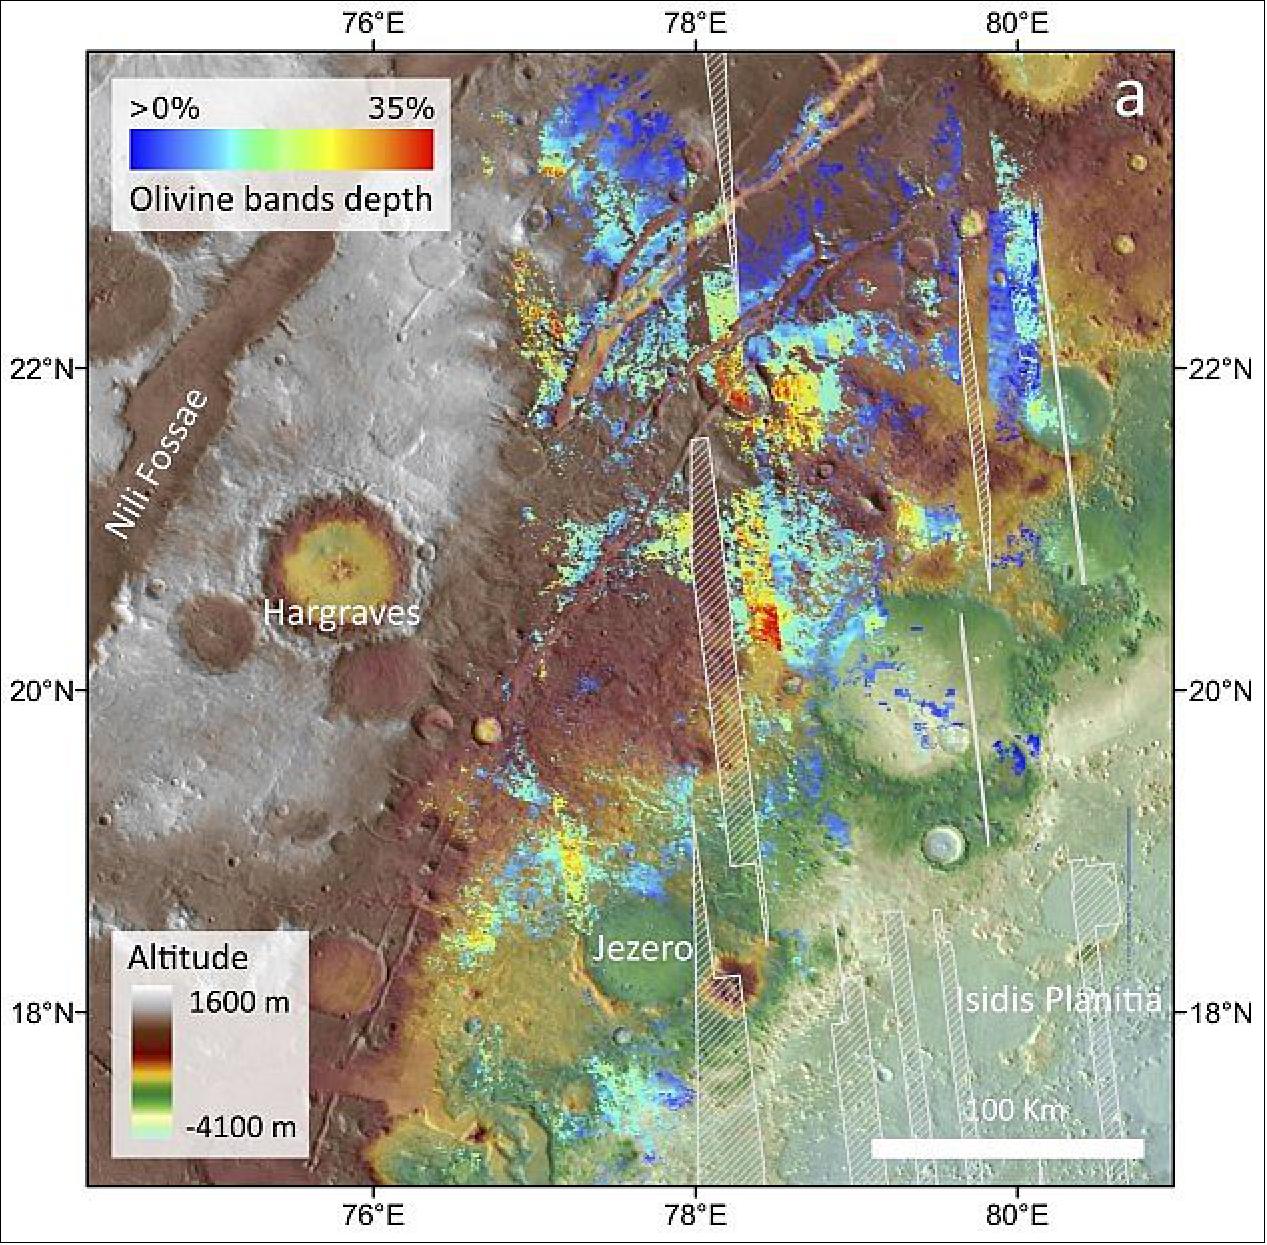 Figure 84: This image of the martian surface maps the olivine-rich rock of the area surrounding Jezero crater, the future landing site for NASA's 2020 Mars Perseverance rover. It combines spectral data in the near-infrared, thermal radiance, and altimetry from ESA's Mars Express, NASA's Mars Reconnaissance Orbiter and NASA's Mars Odyssey missions. The altitude of the surface is represented as shown in the key to the bottom left, with the depth of the olivine-bearing material absorption bands represented as shown in the key to the top left (image credit: L. Mandon et al. (2020))